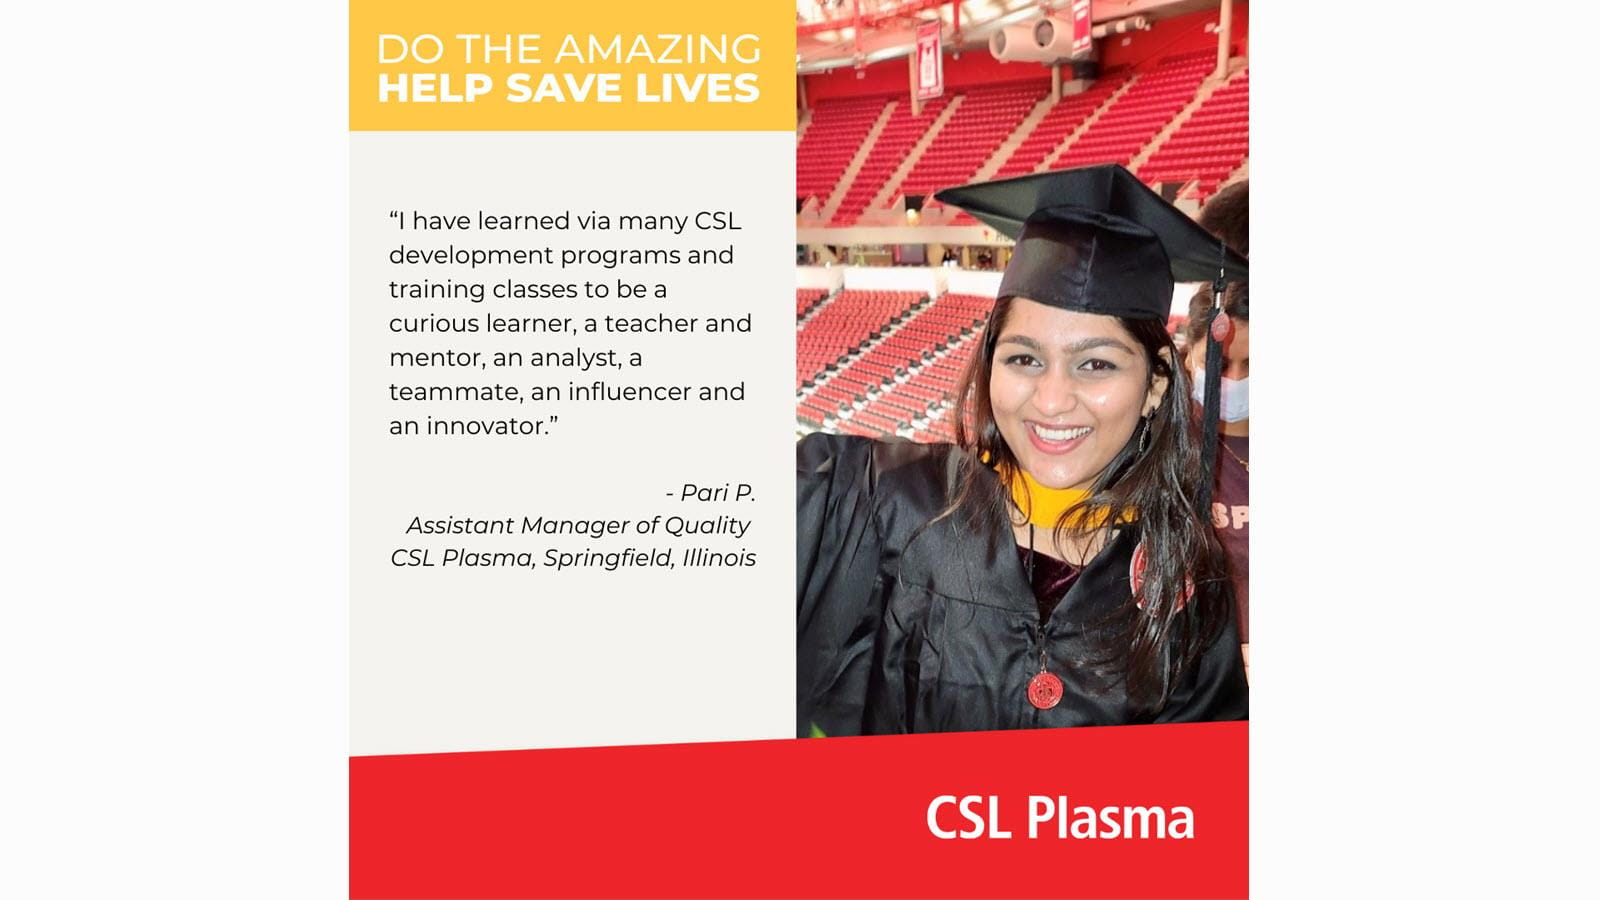 Pari, in a graduation cap and gown, says CSL development programs have helped her continue growing her skills.